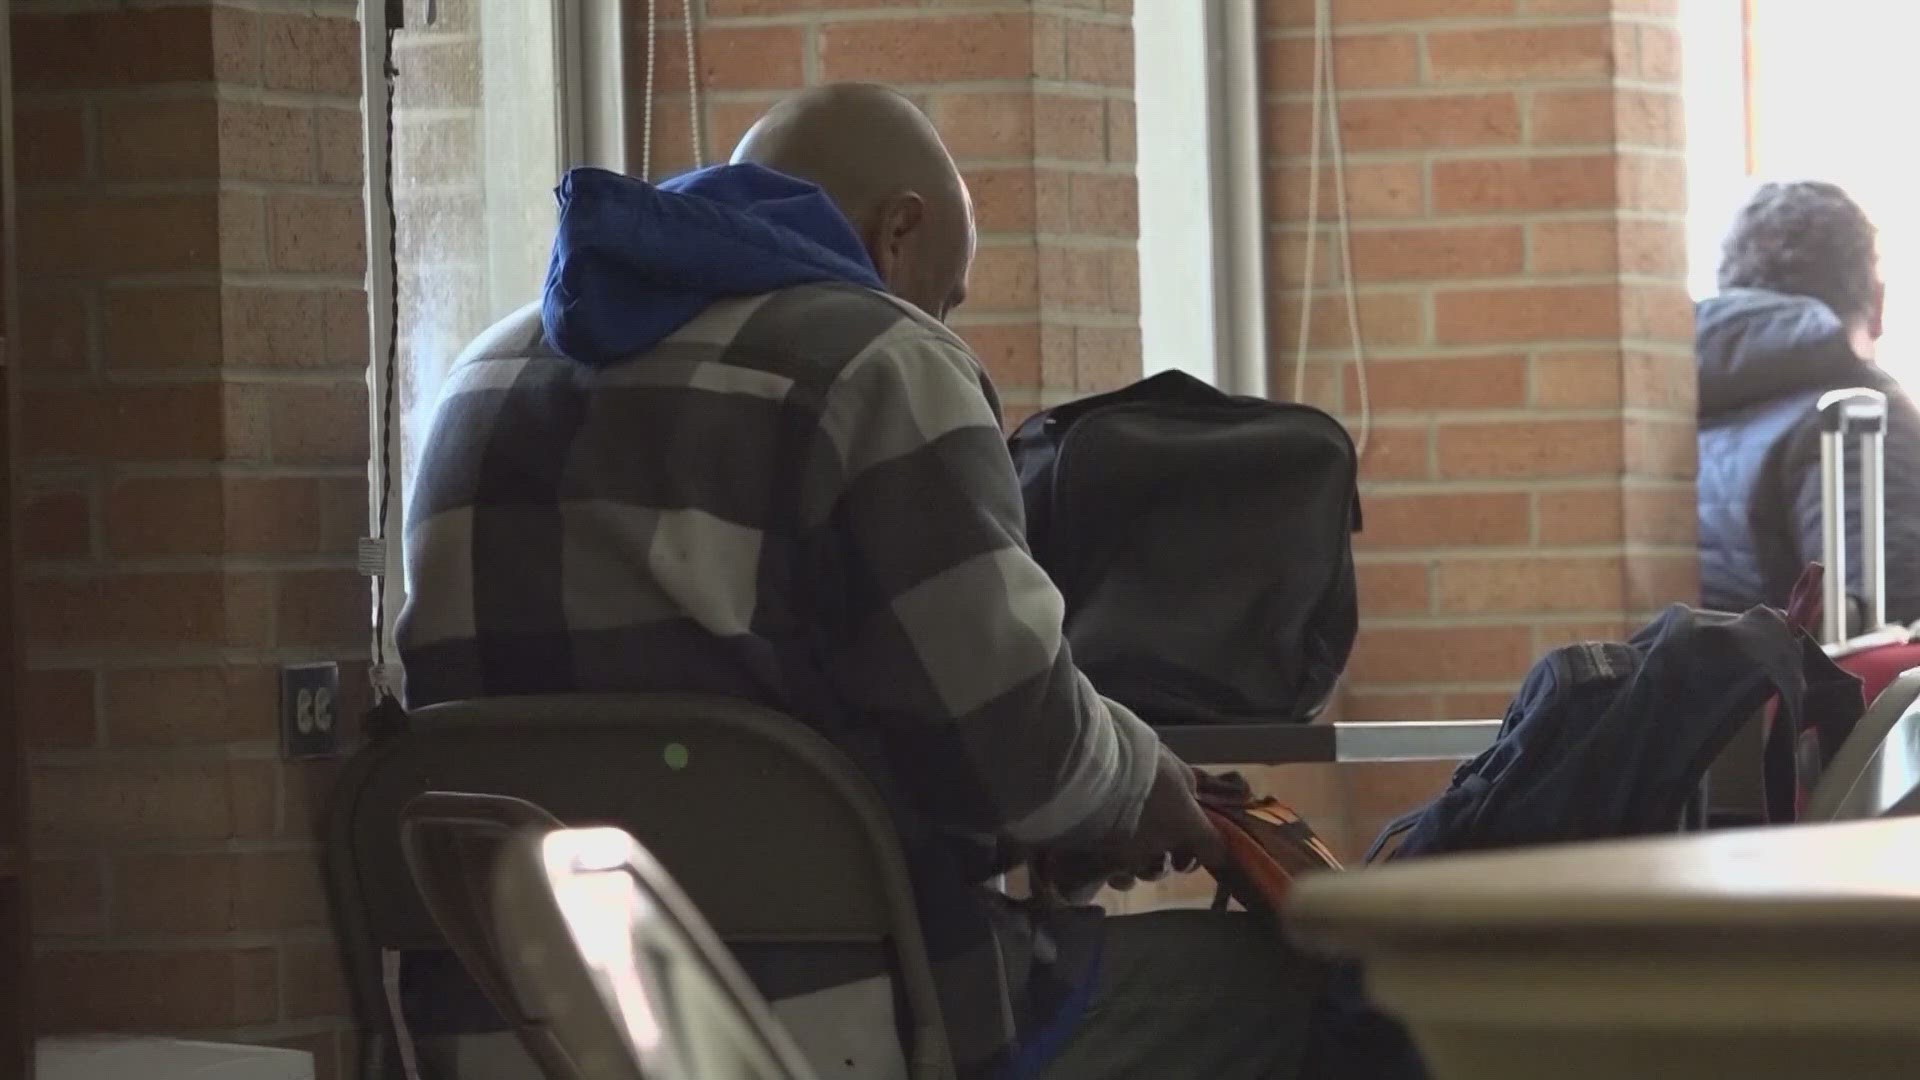 The city and the county have set up warming centers for people with different needs.